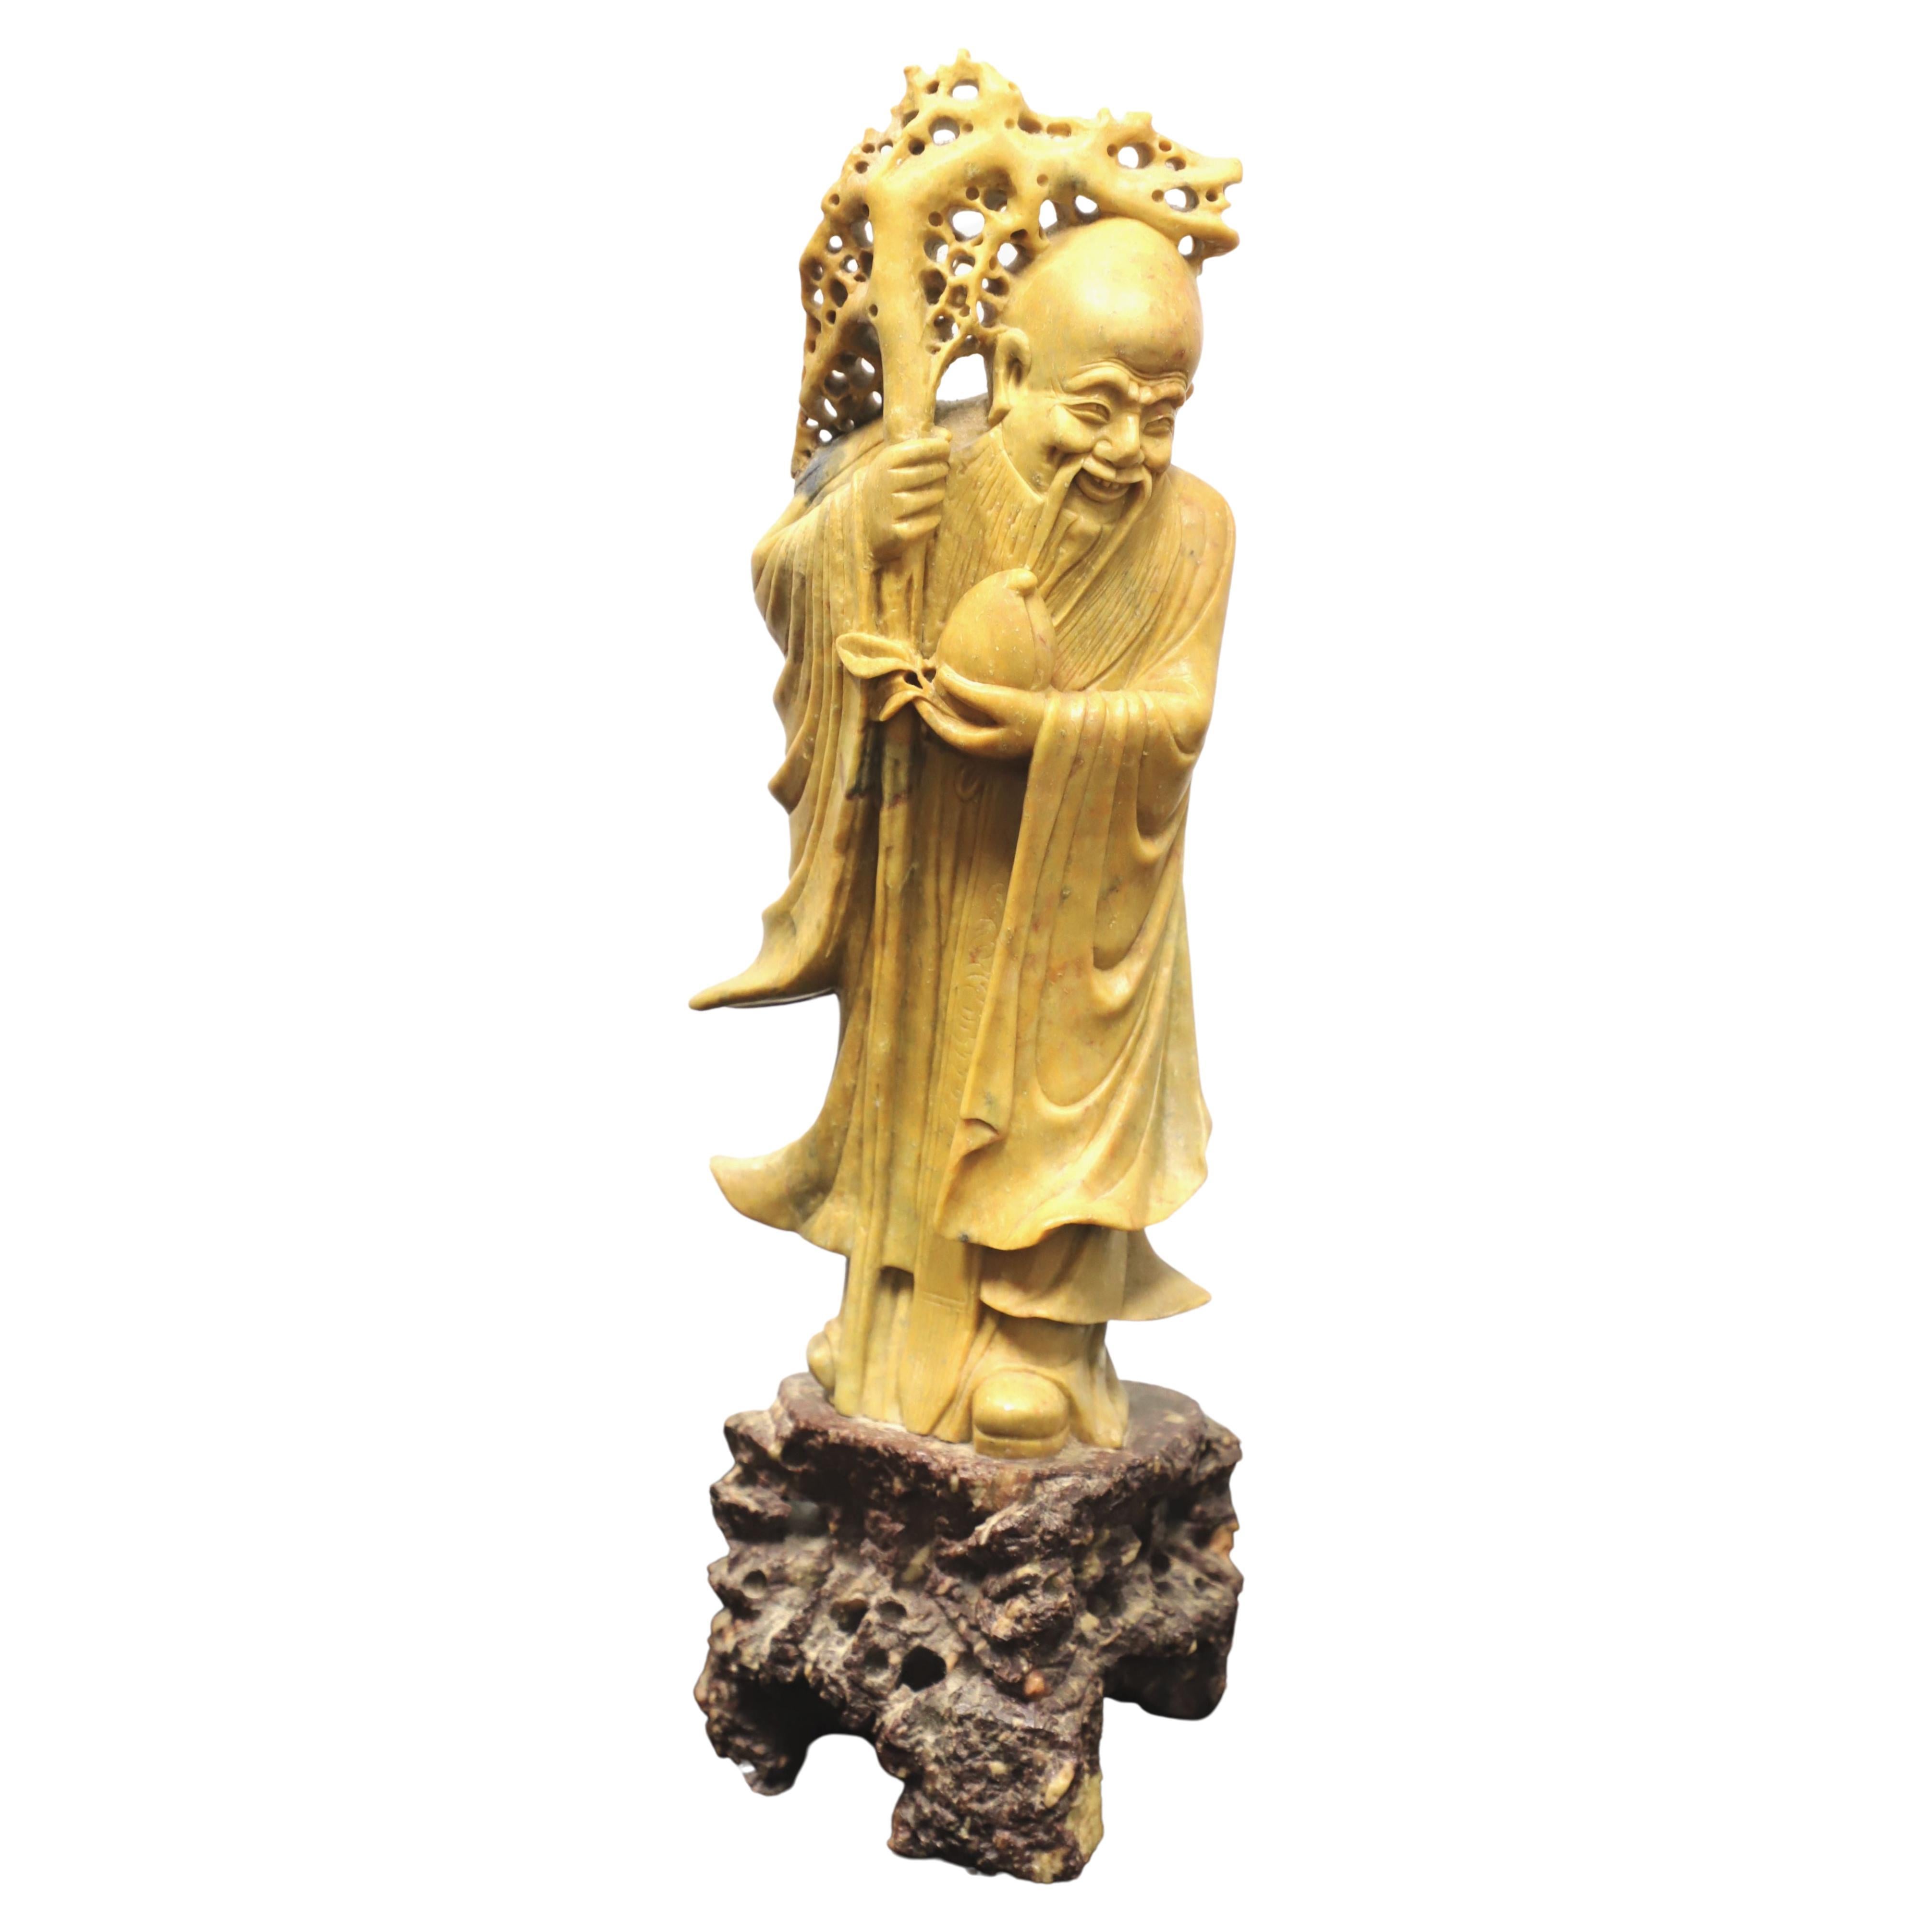 Mid 20th Century Carved Soapstone Sculpture "Shou Lao"